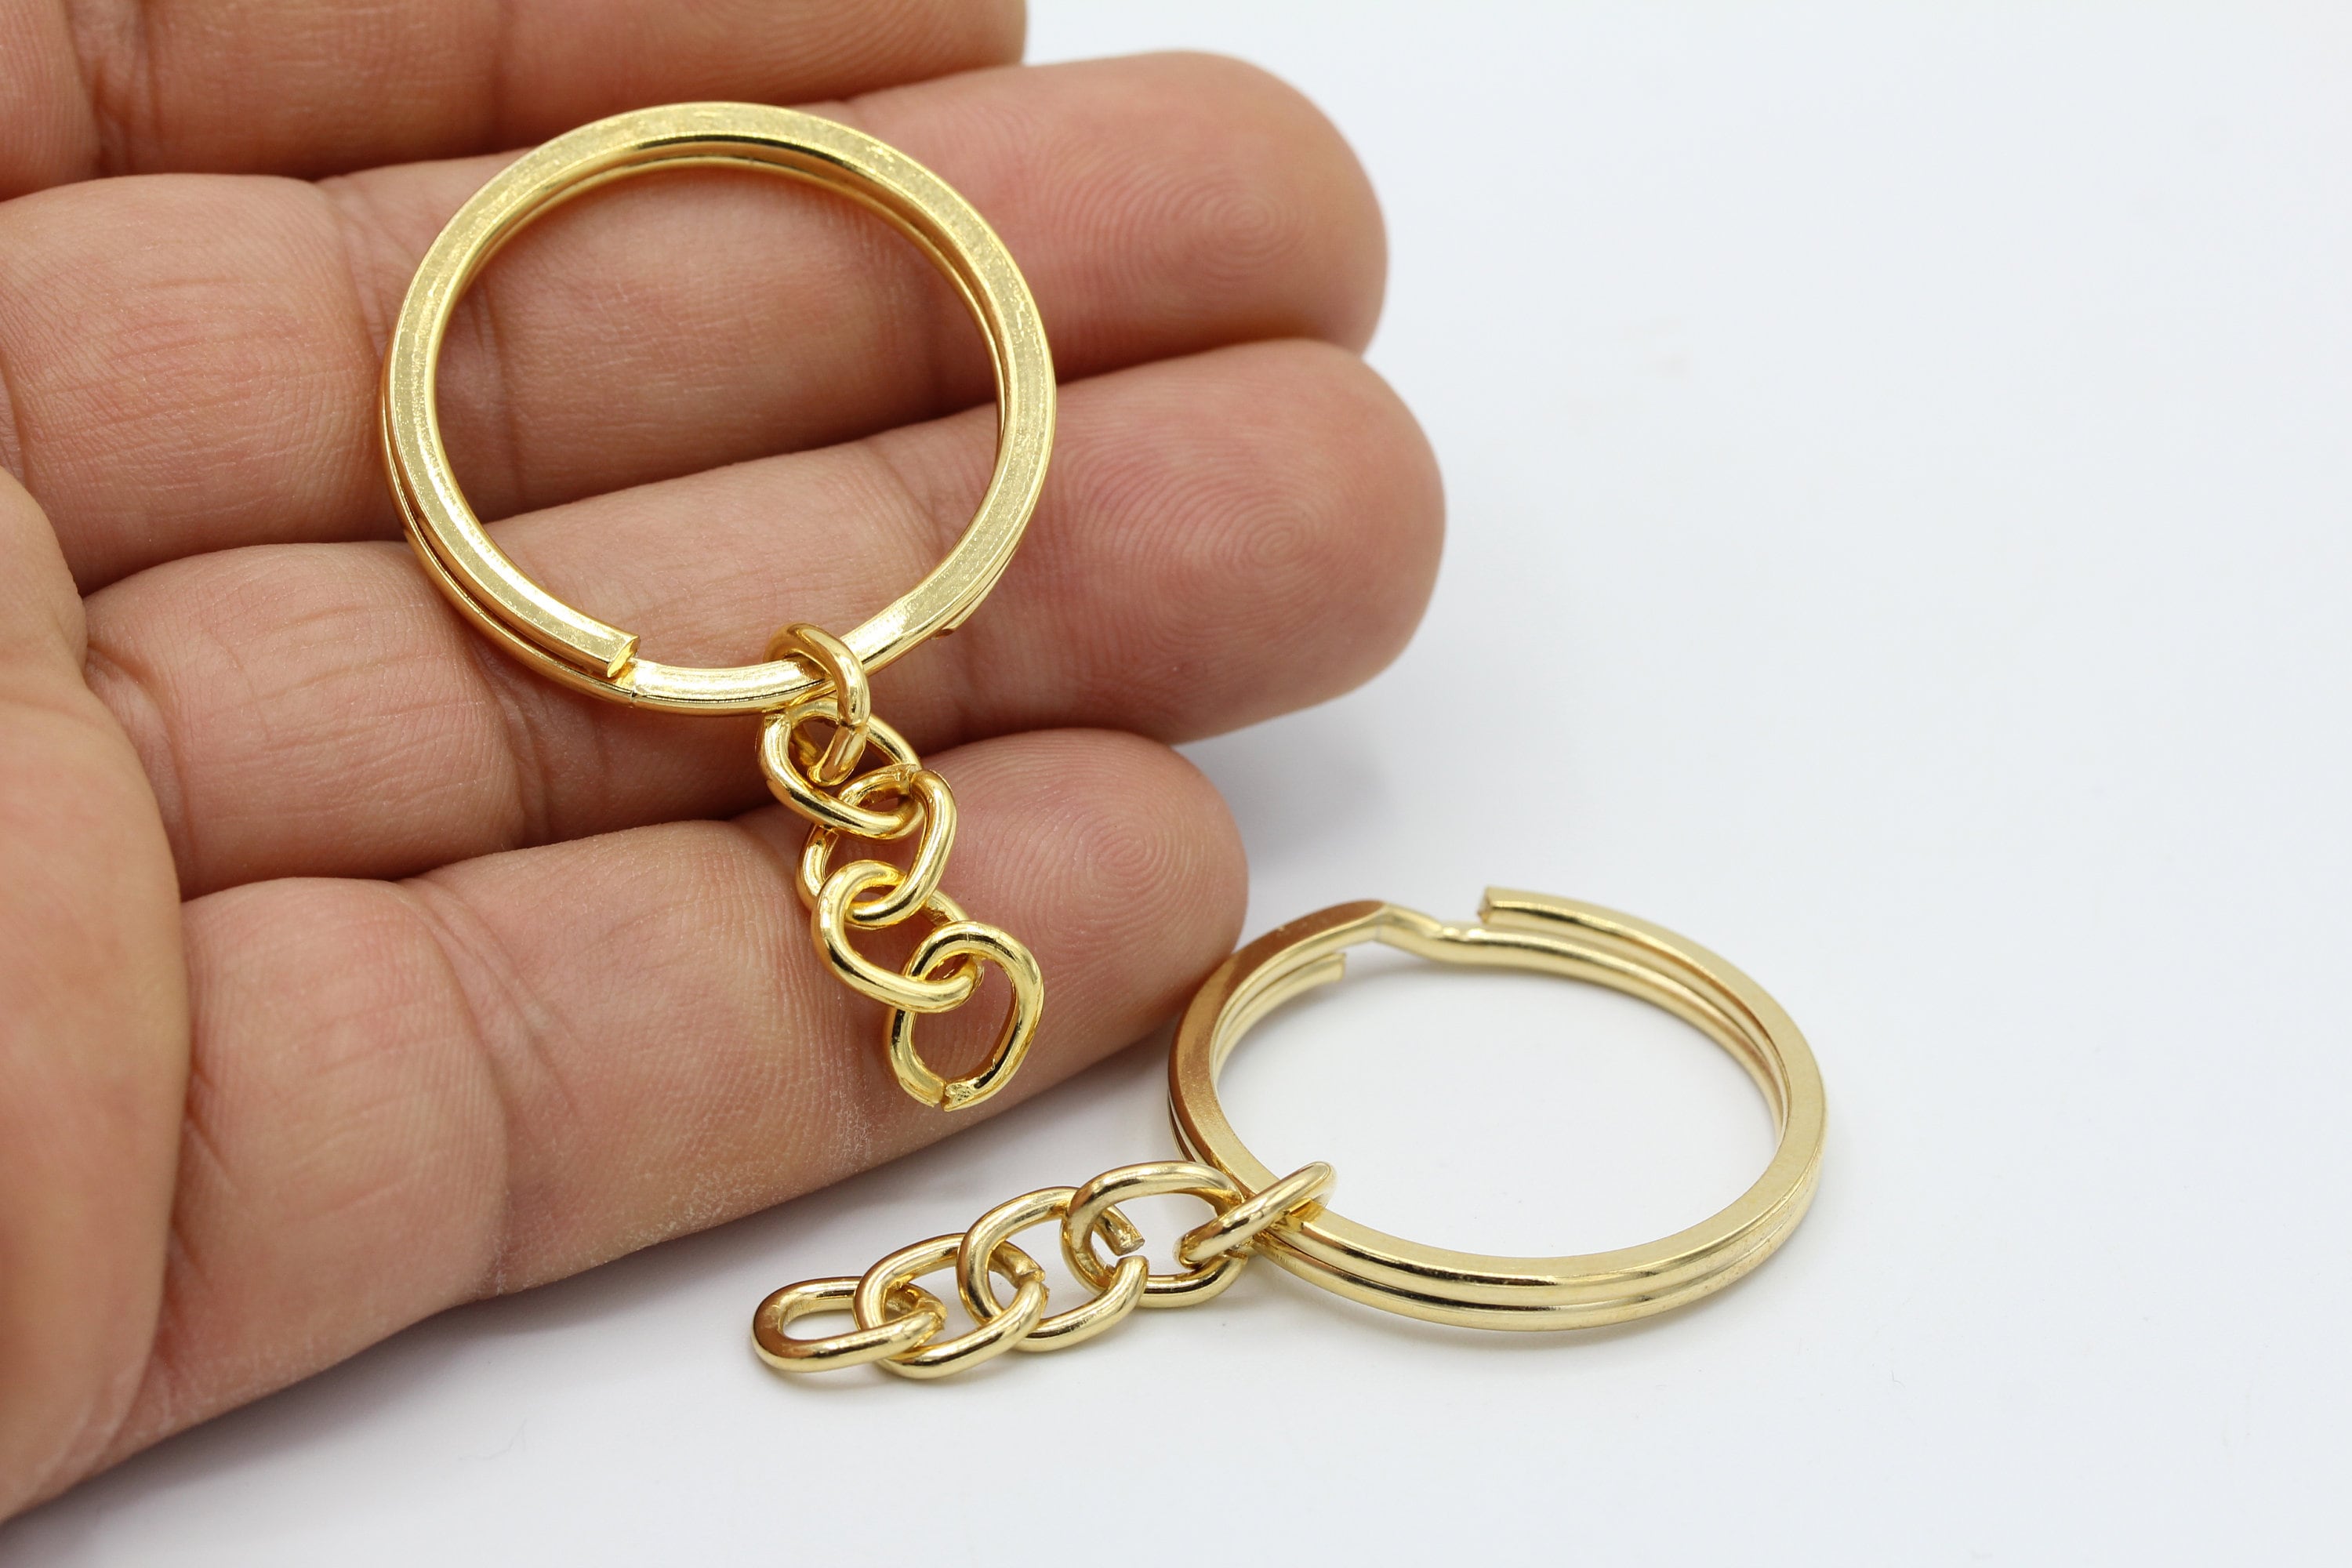 200pcs Gold Color Small Key Rings 16/14/12/10mm Outer Metal Split Key Rings  Metal Key Chain Rings -  Israel